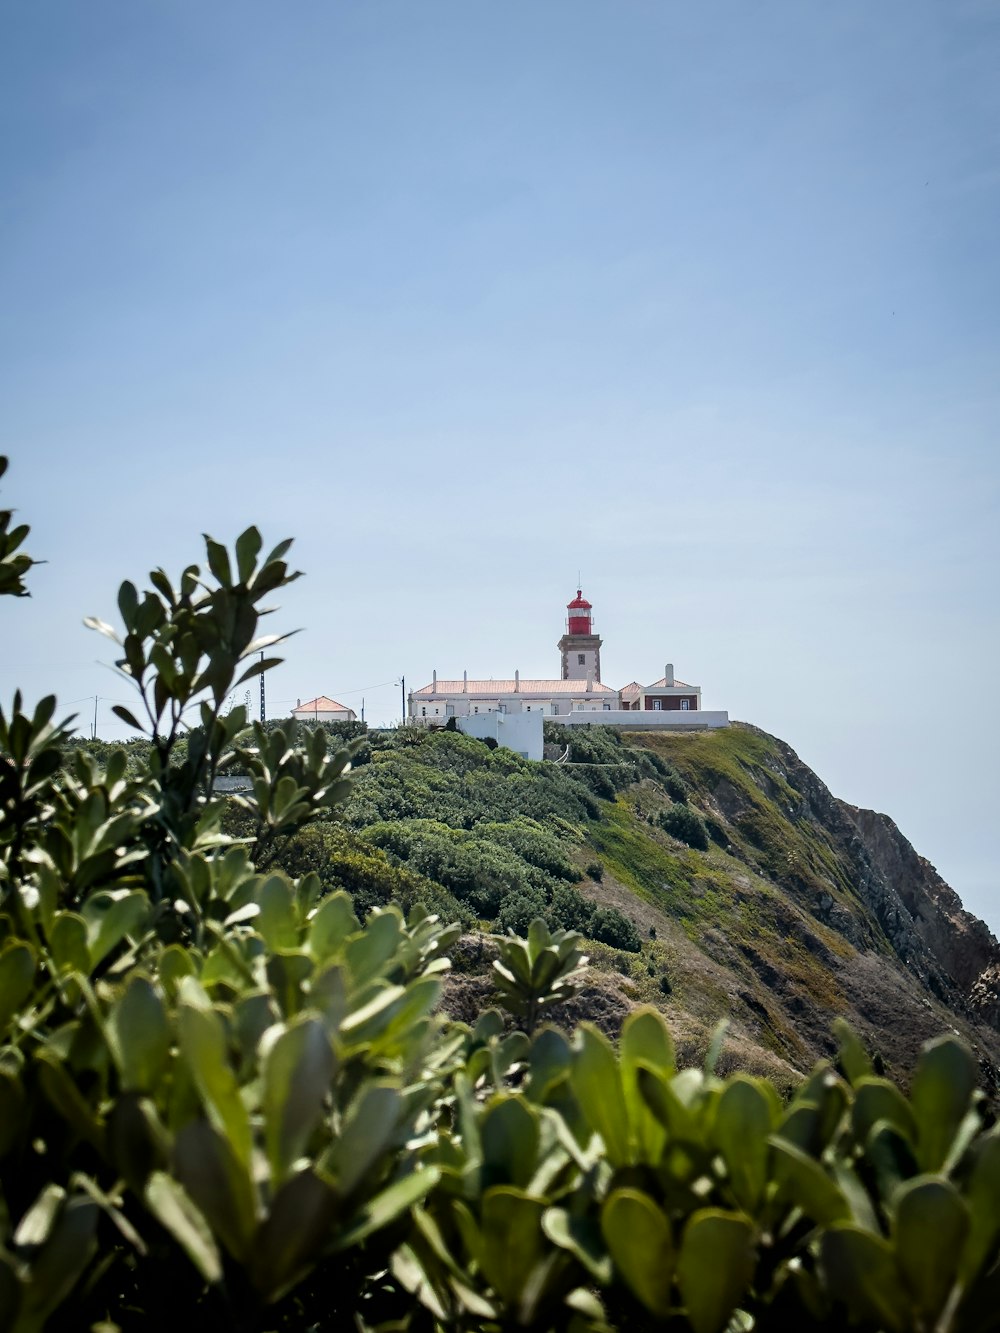 a lighthouse on top of a hill surrounded by greenery